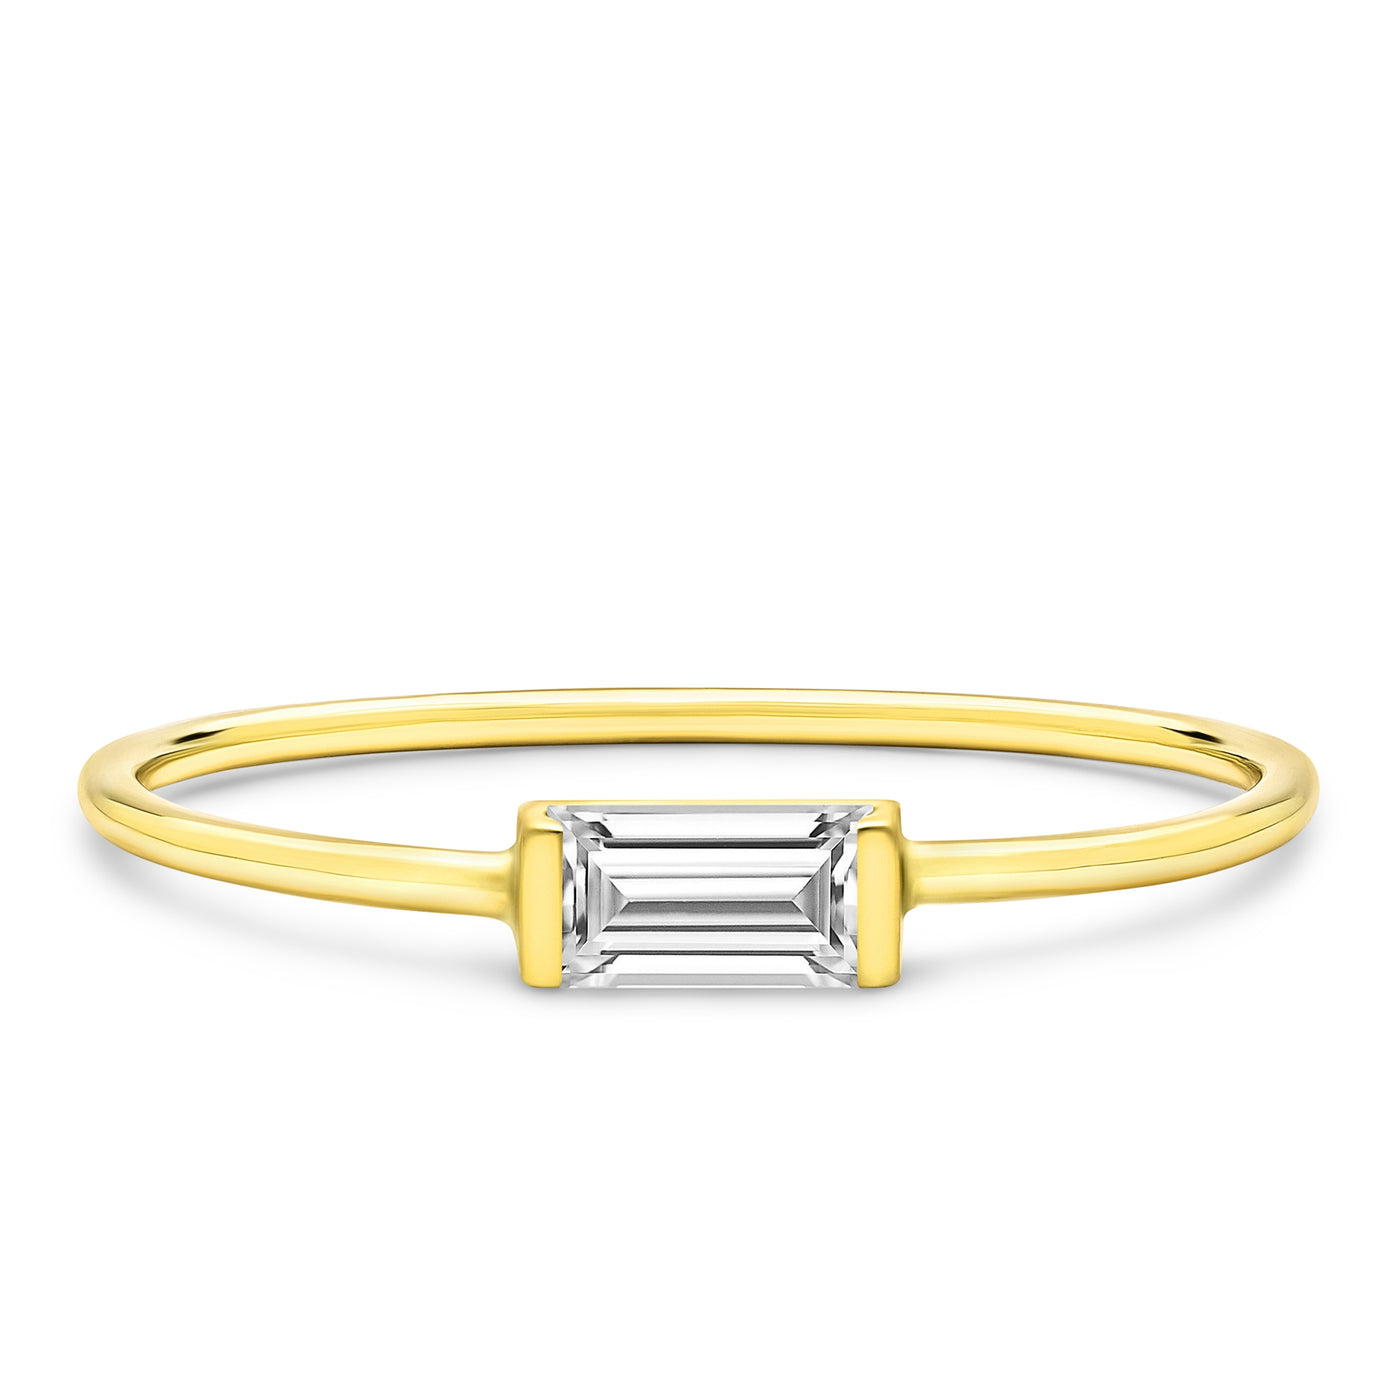 14K Solid Gold White Sapphire Baguette Minimalist Ring